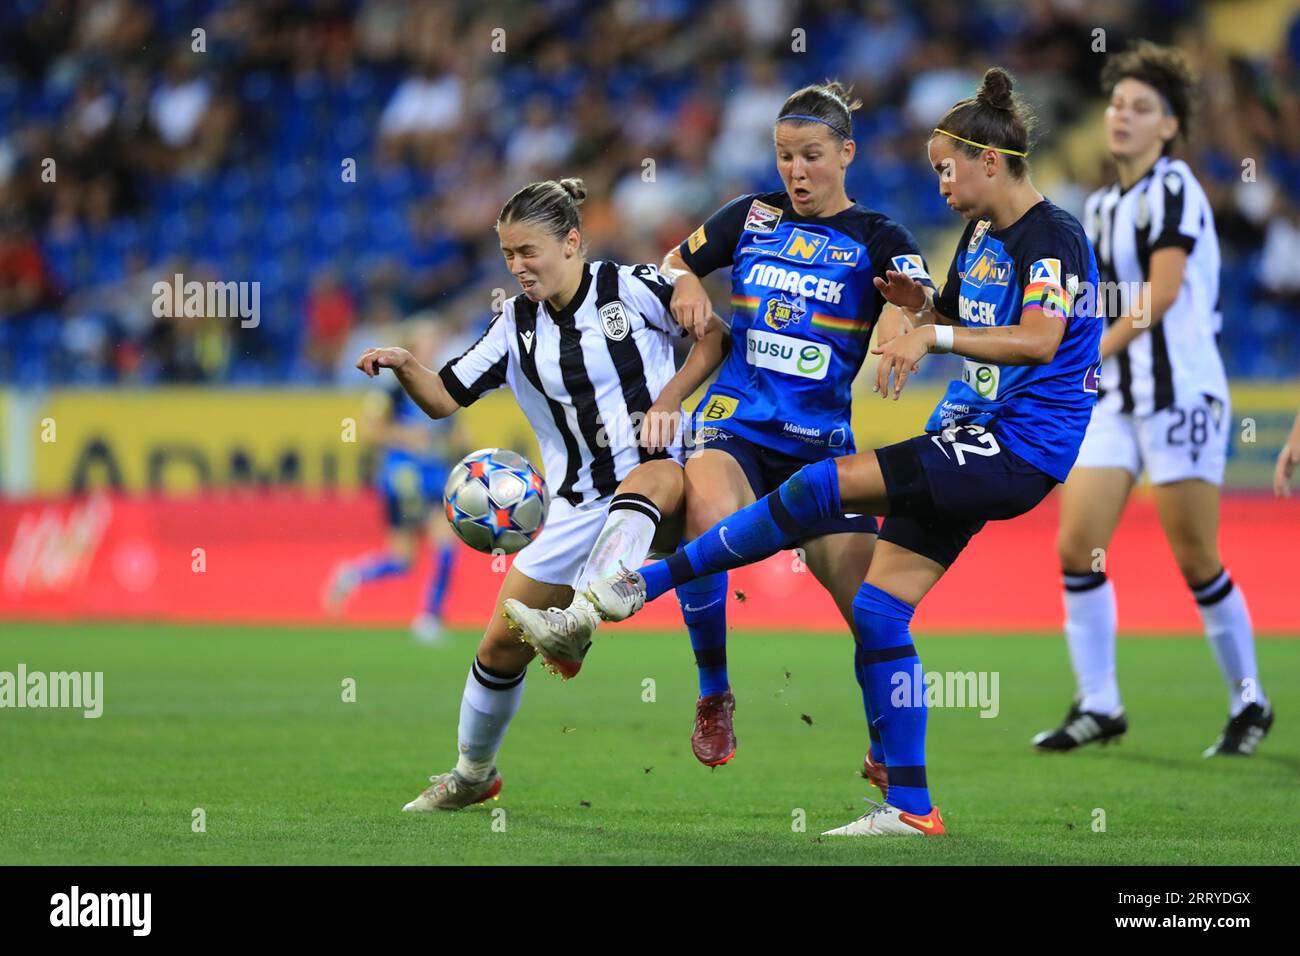 Esse Akida (14 FC PAOK Thessaloniki) and Julia Tabotta (19 SKN St Polten) clearing the ball during the UEFA Womens Champions League qualifying match St Polten vs PAOK at NV Arena St Polten (Tom Seiss/ SPP) Credit: SPP Sport Press Photo. /Alamy Live News Stock Photo